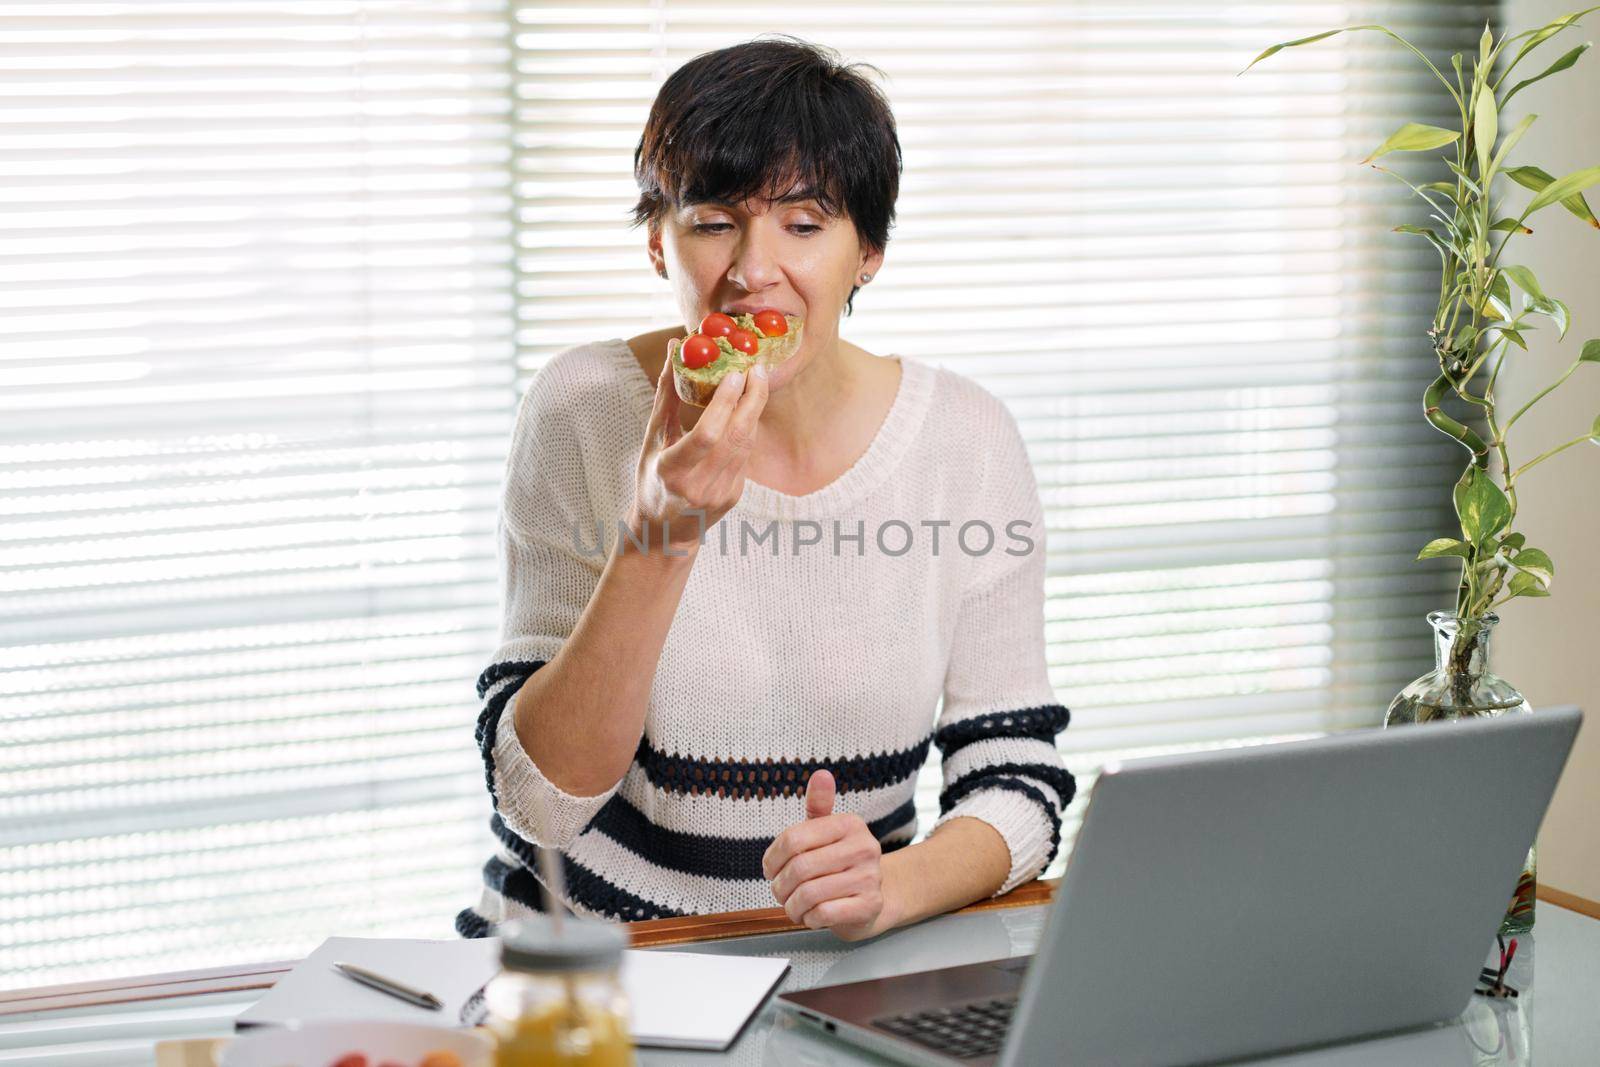 Woman eating some healthy food, while teleworking from home on her laptop. Female in her 50s